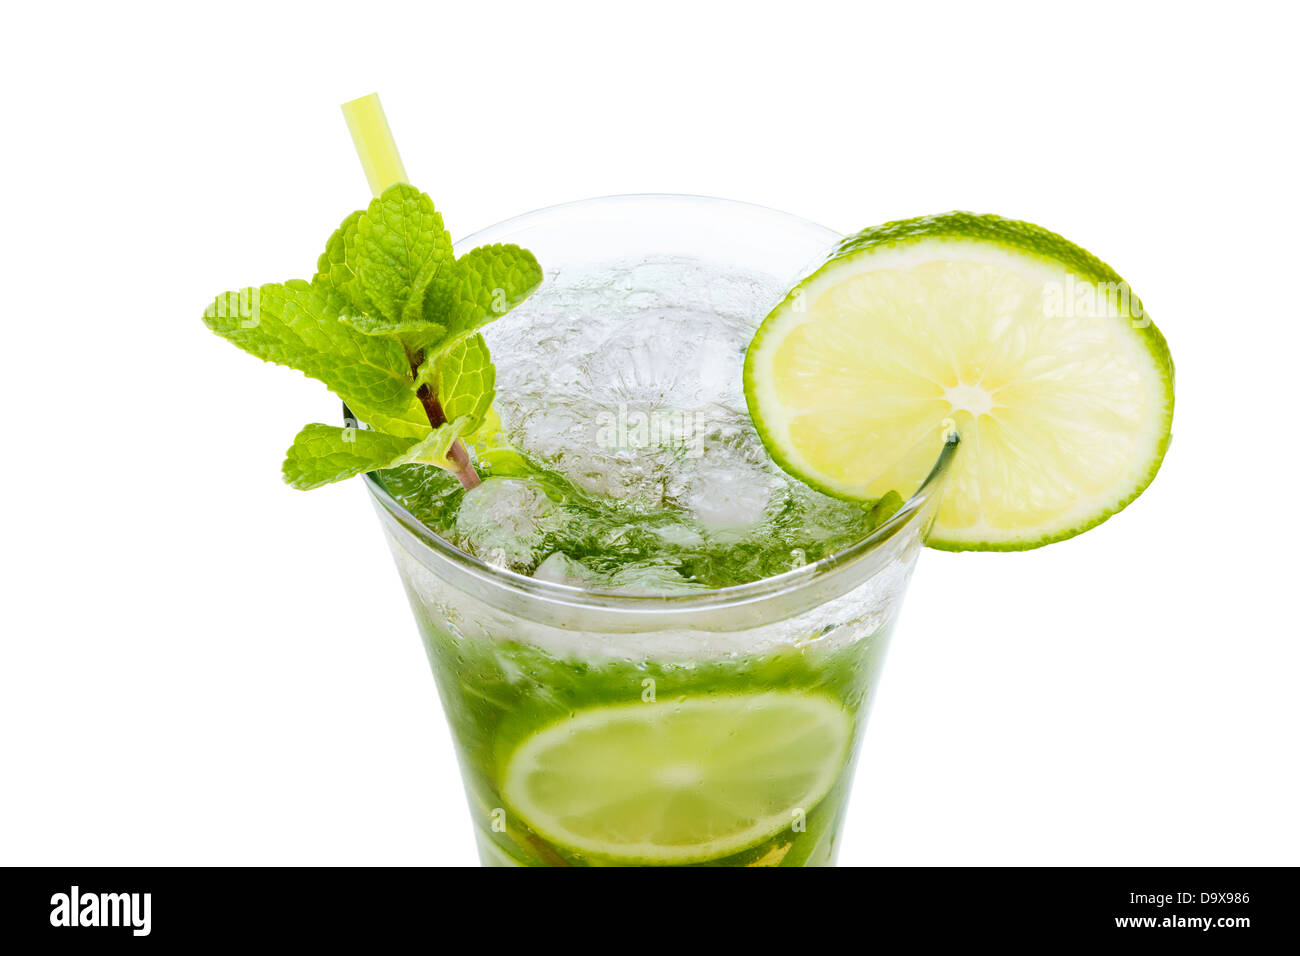 https://c8.alamy.com/comp/D9X986/mojito-cocktail-isolated-on-white-background-D9X986.jpg